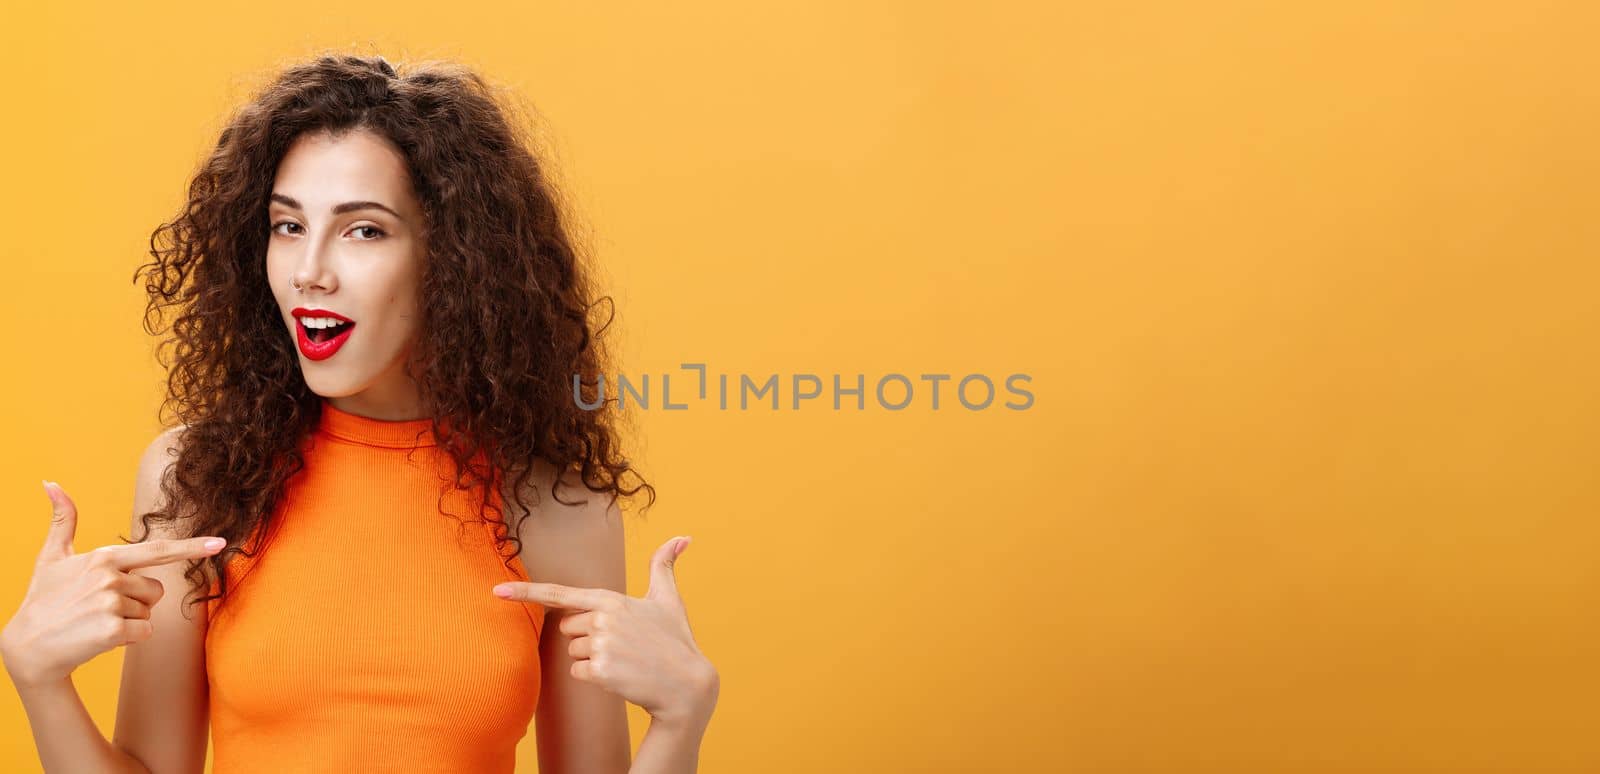 Proud and satisfied cool urban female with red lipstick. and curly hairstyle pointing at herself with self-assured expression winking bragging about skills and achievements over orange background.